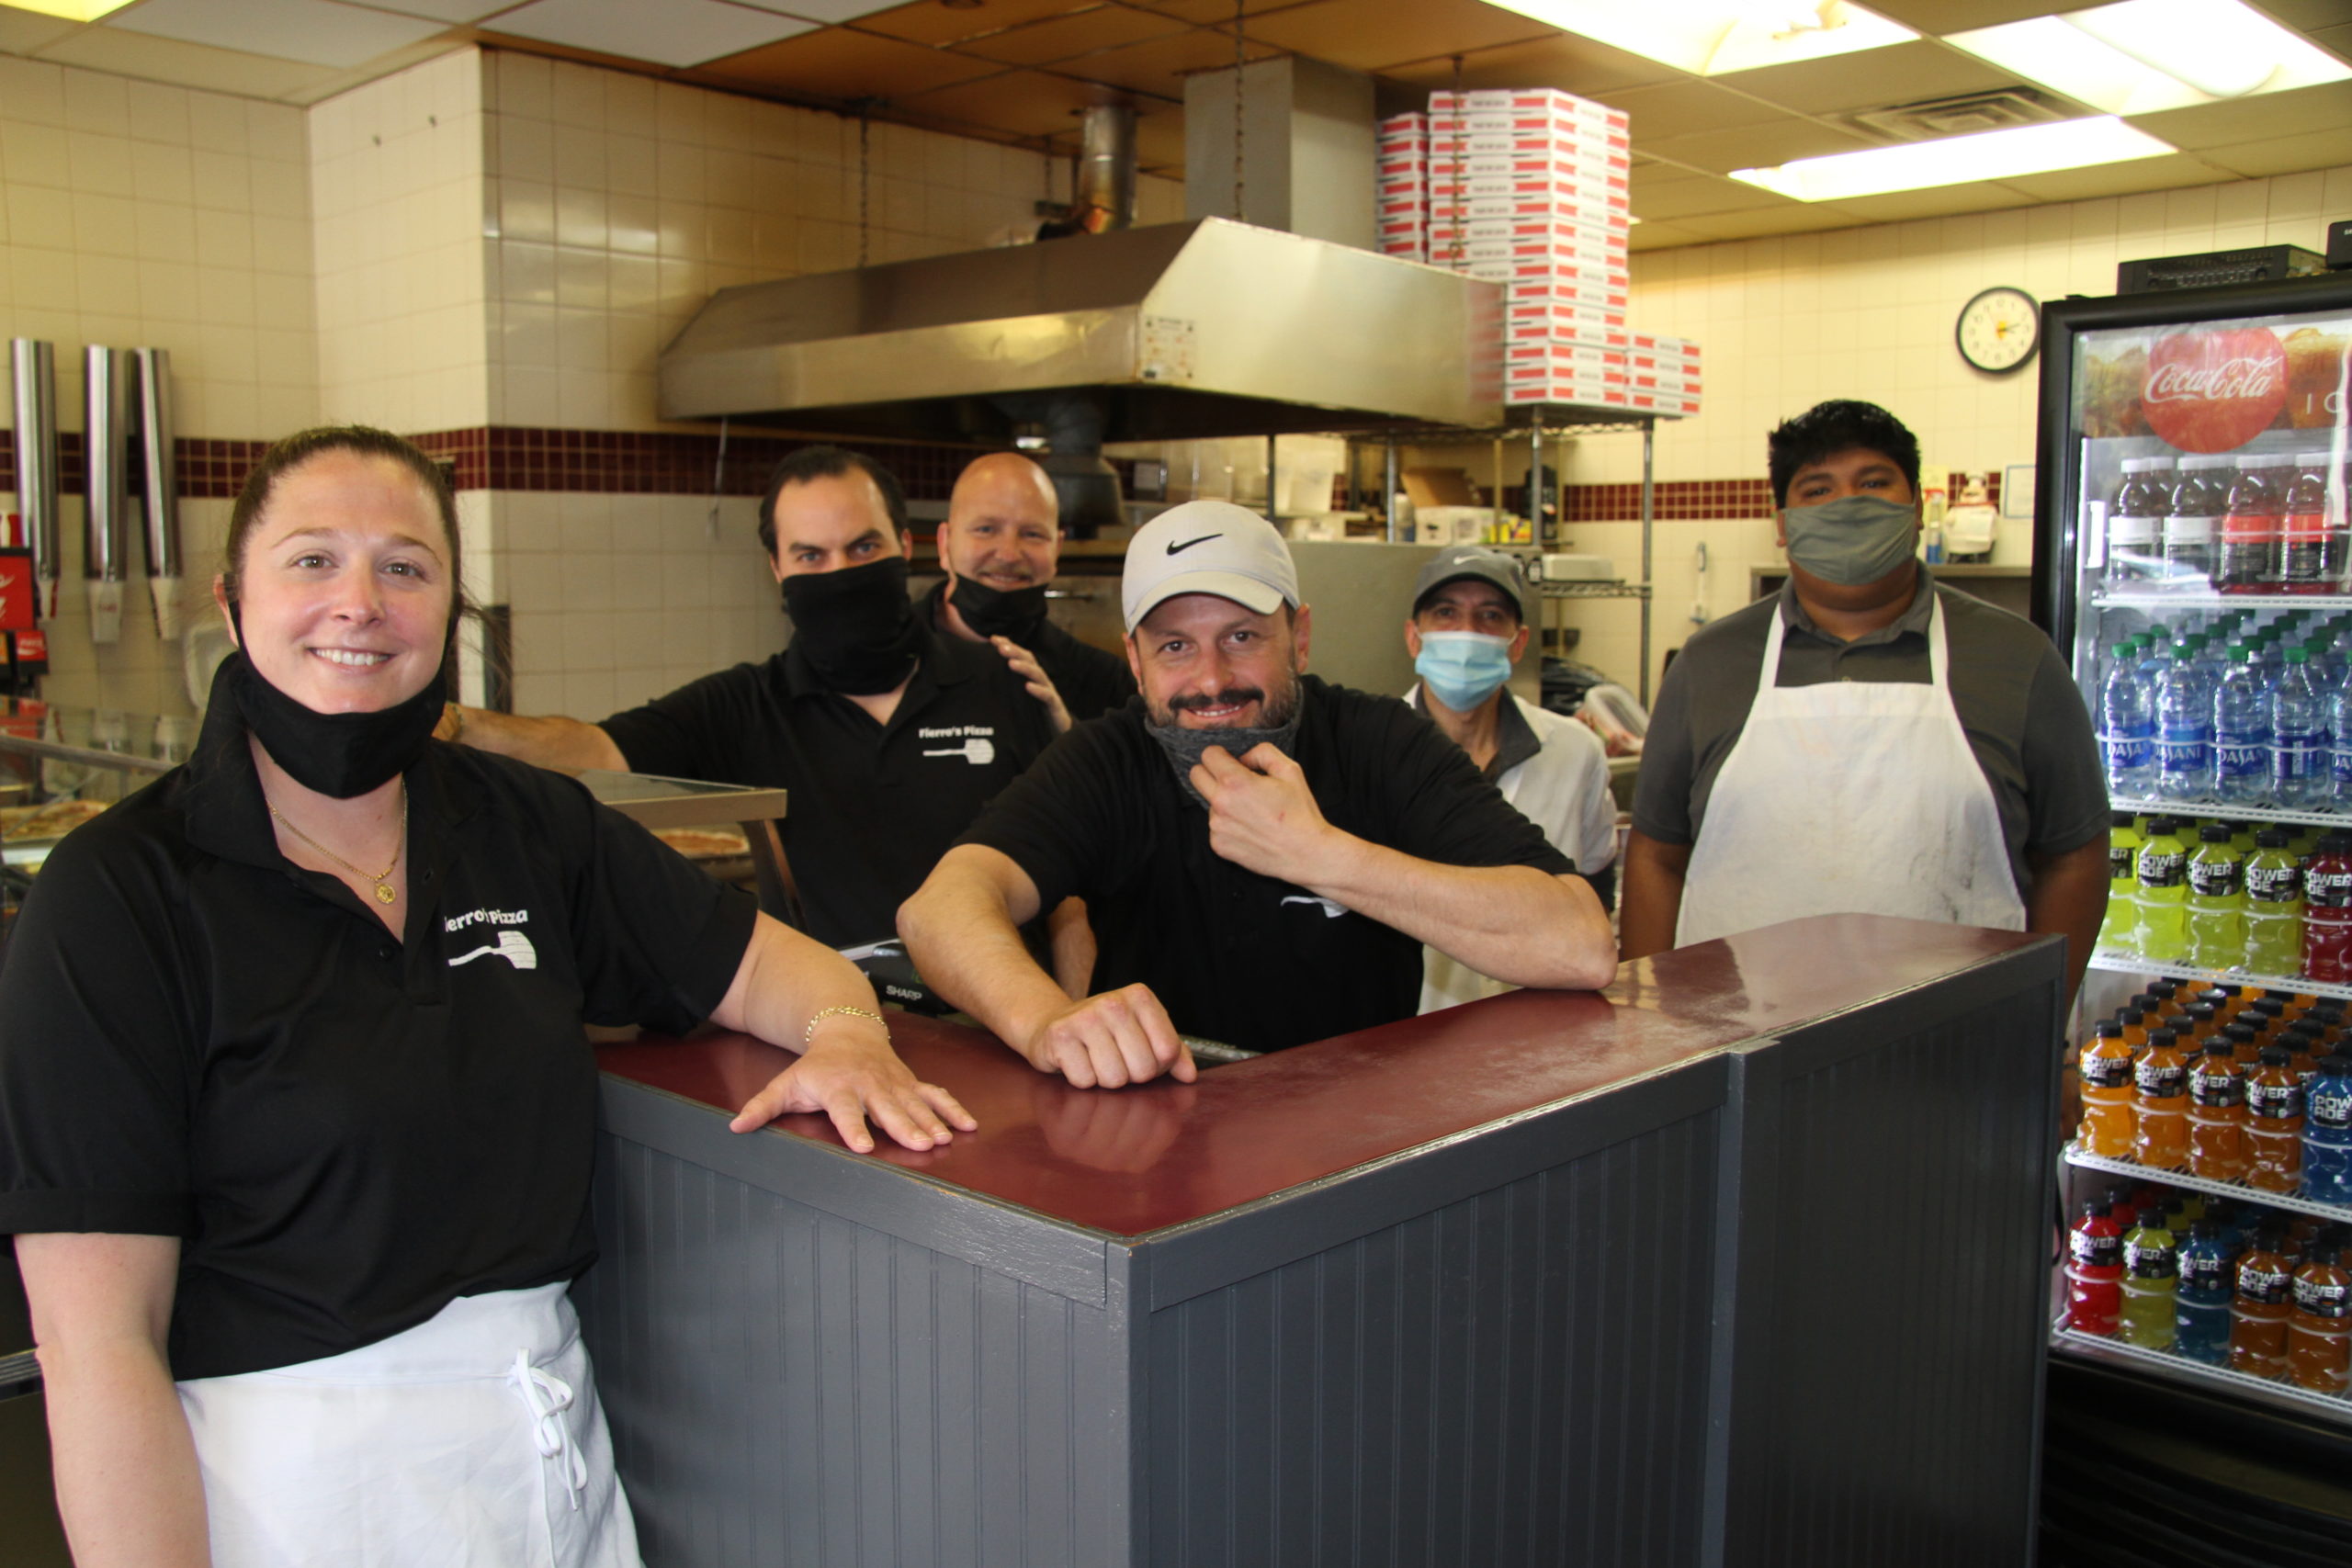 The crew of Fiero's Pizza in East Hampton welcomed two new partners, Emma Beudert and Joe Kastrati, this week.